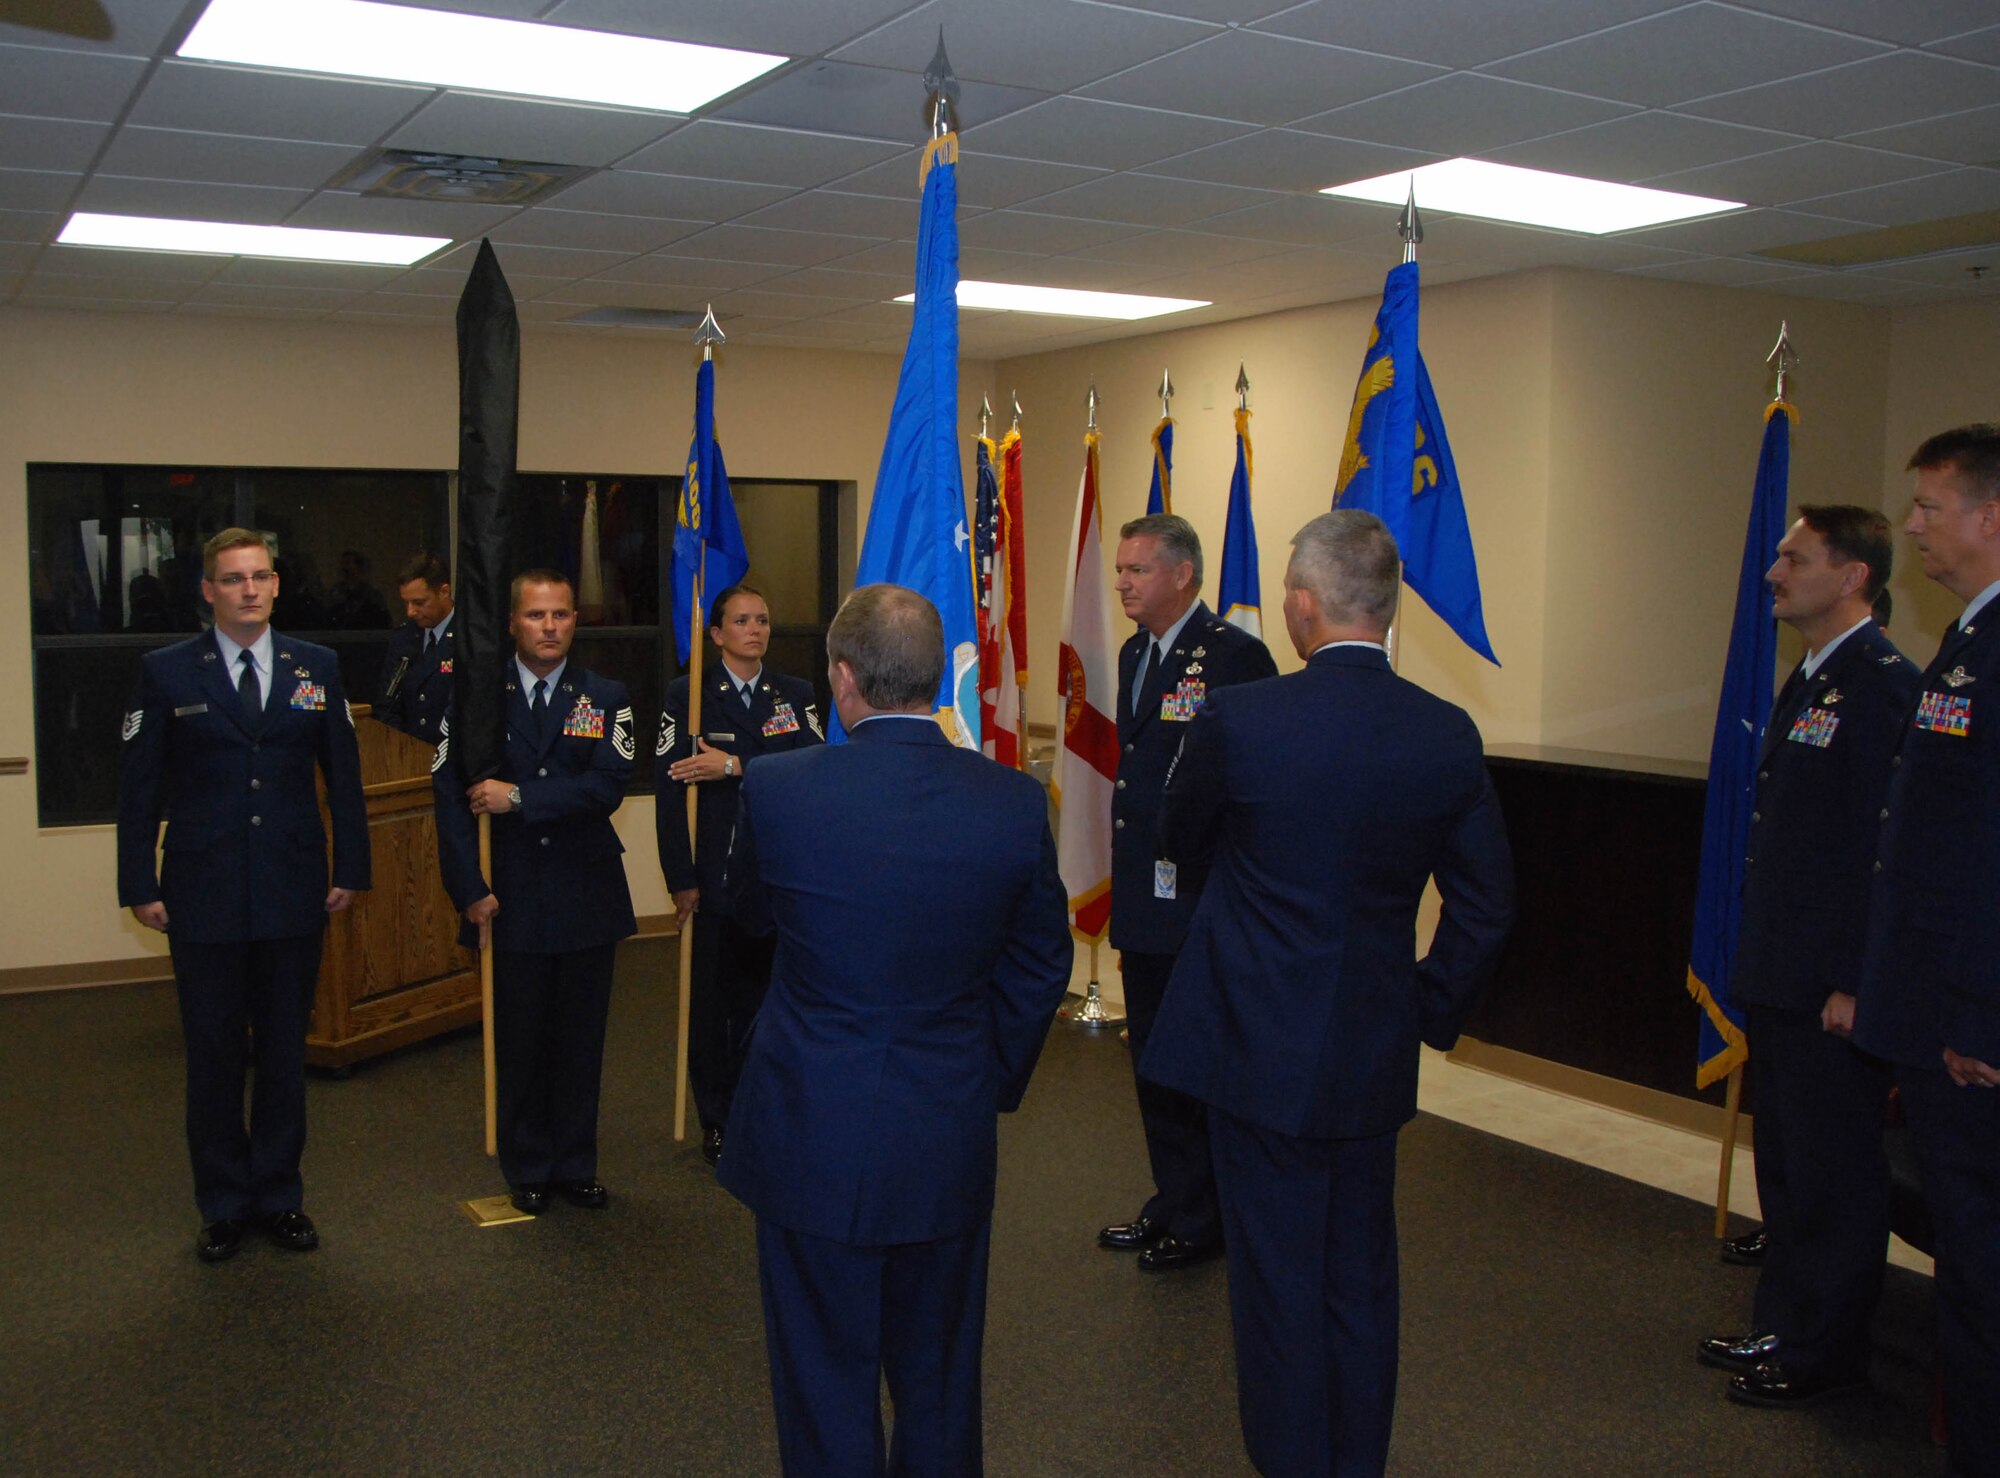 (From left to right, facing) Tech. Sgt. Michael Squier, Chief Master Sgt. Lynn Boop, Master Sgt. Tiffiney Kellum, Brig. Gen. Joseph Balskus, Col. Scott Barberides, Col. Randy Spear, (and in foreground) Chief Master Sgt. Ewell Griswold and Senior Master Sgt. Billie Statom, participate in the presentation of the guidon of the newly formed 101st Air & Space Operations Group (formerly known as Southeast Air Defense Sector) at a ceremony Aug. 21, 2010 at Tyndall Air Force Base, Fla.  (U.S. Air Force photo by Capt. Jared Scott)